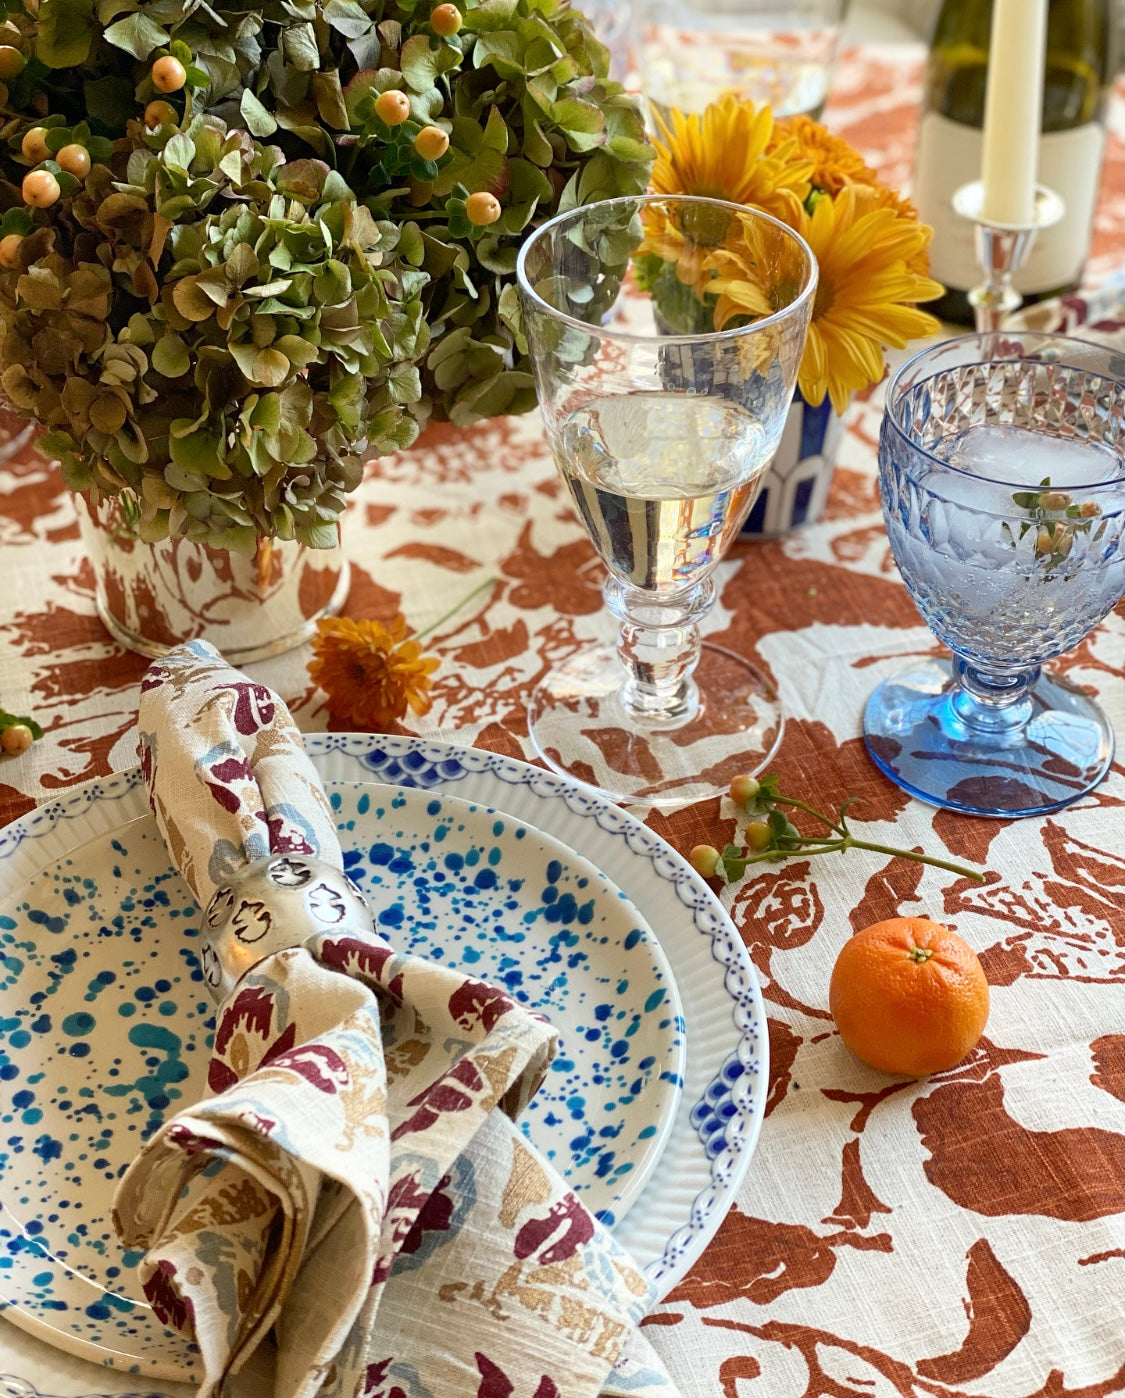 Tablescape by Ariel Okin at Ariel Okin Interiors